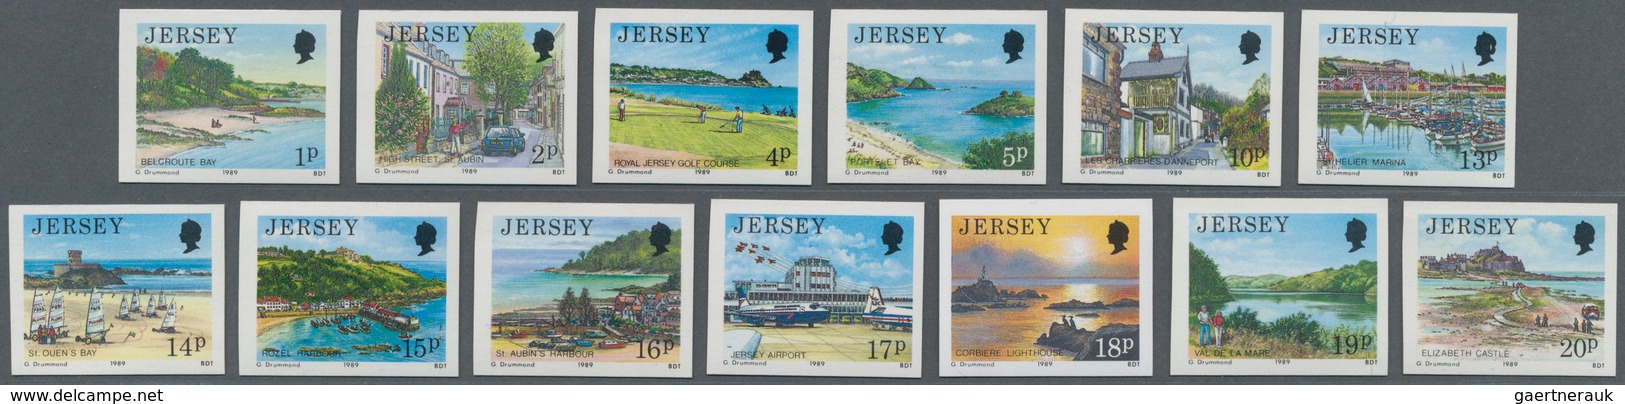 Großbritannien - Jersey: 1989. Complete Definitives Issue (landscapes), 13 Values, In IMPERFORATE Si - Jersey